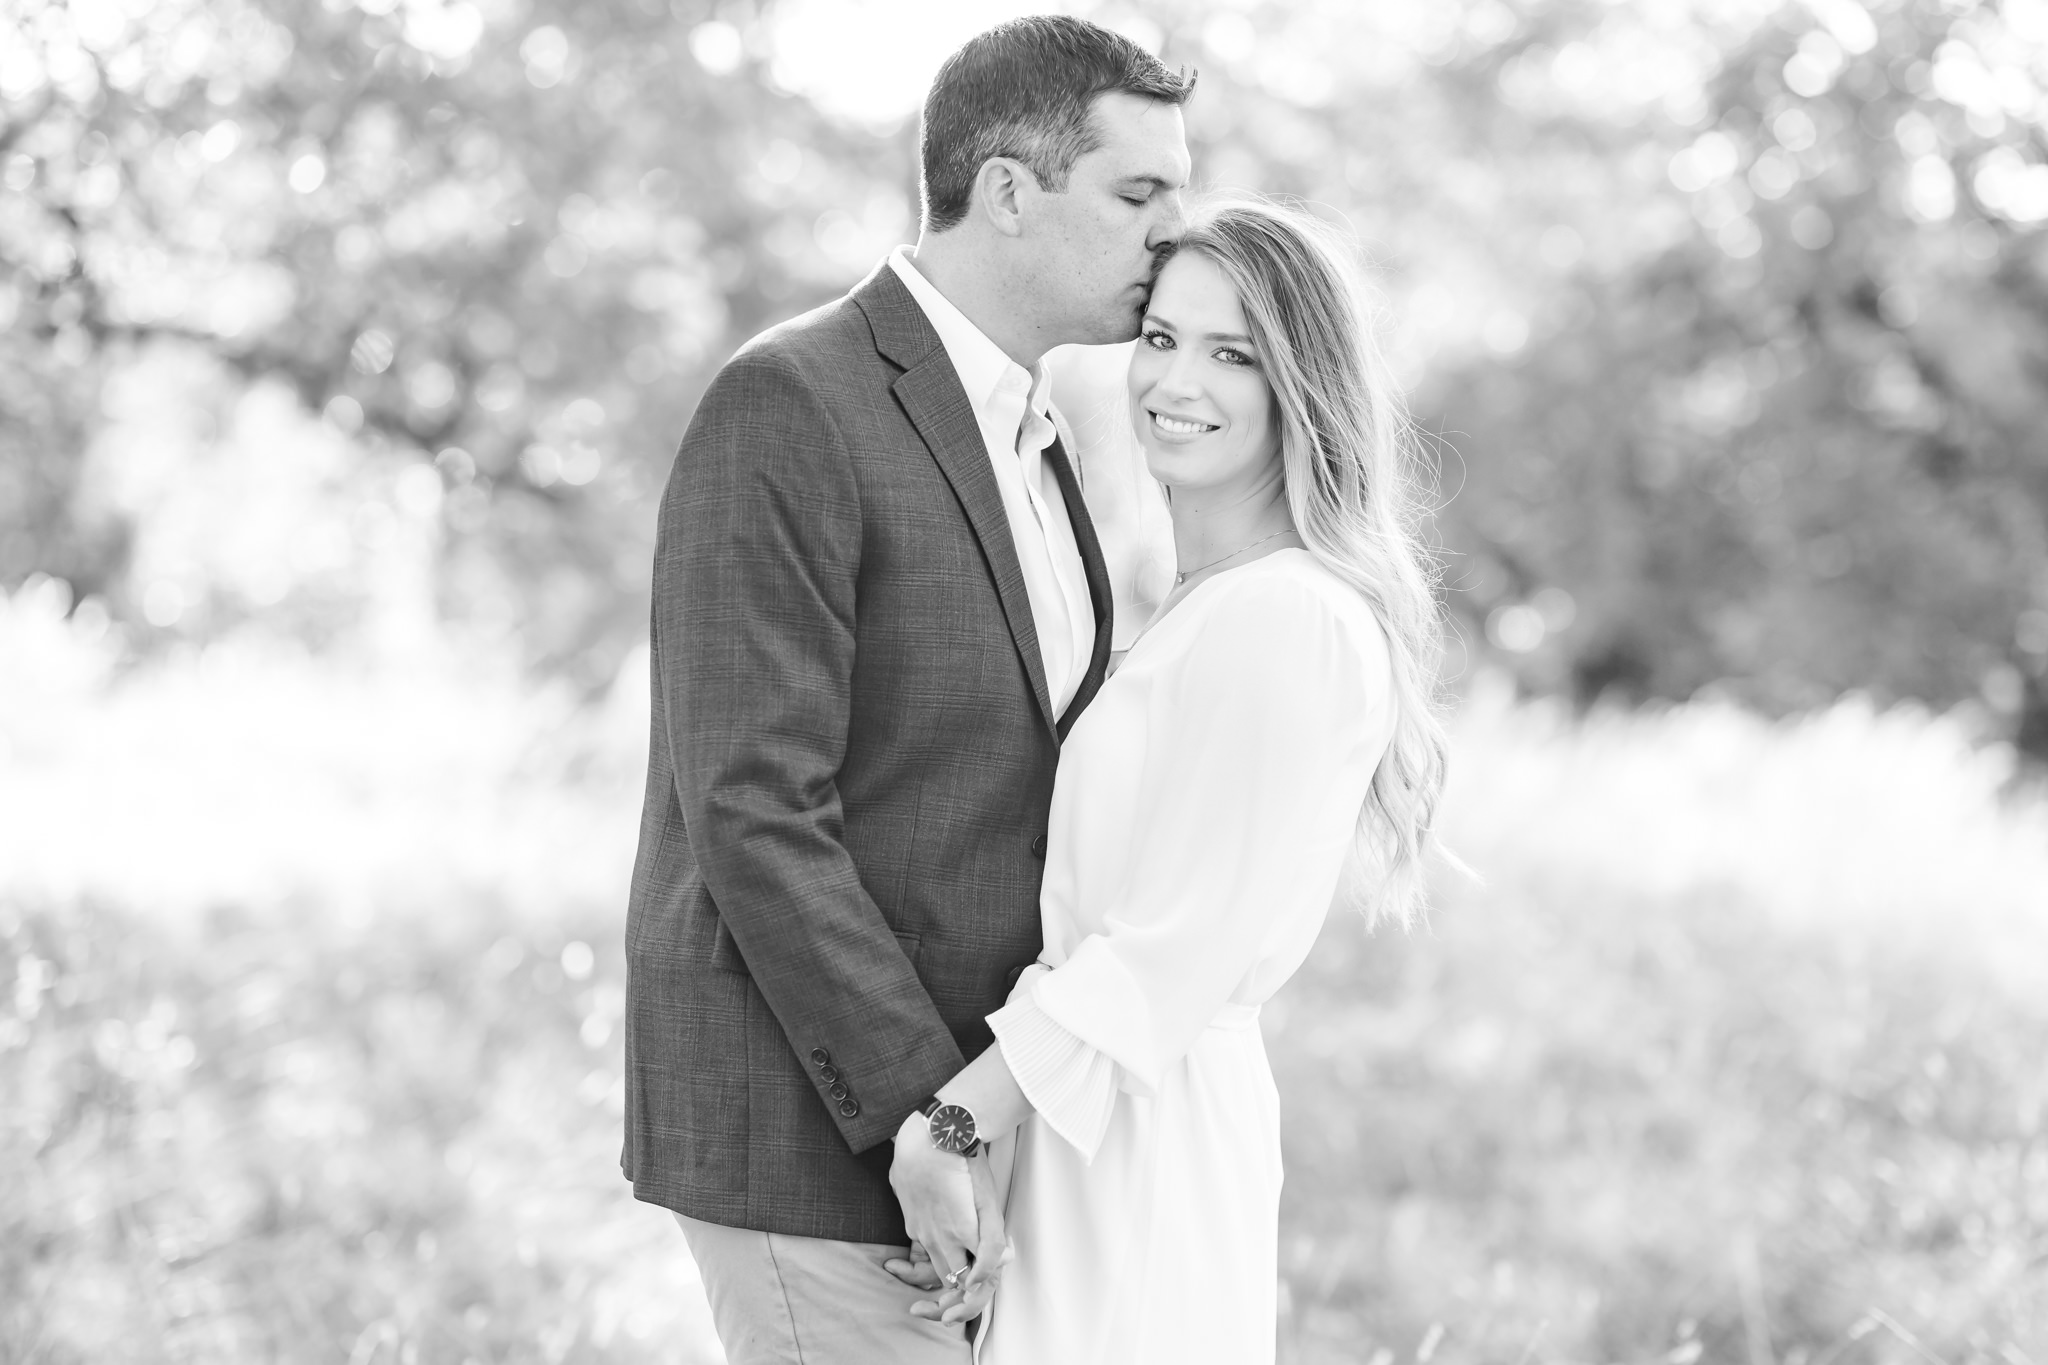 Engagement Session at Overlook Park in Canyon Lake, TX by Dawn Elizabeth Studios, San Antonio Wedding Photographer